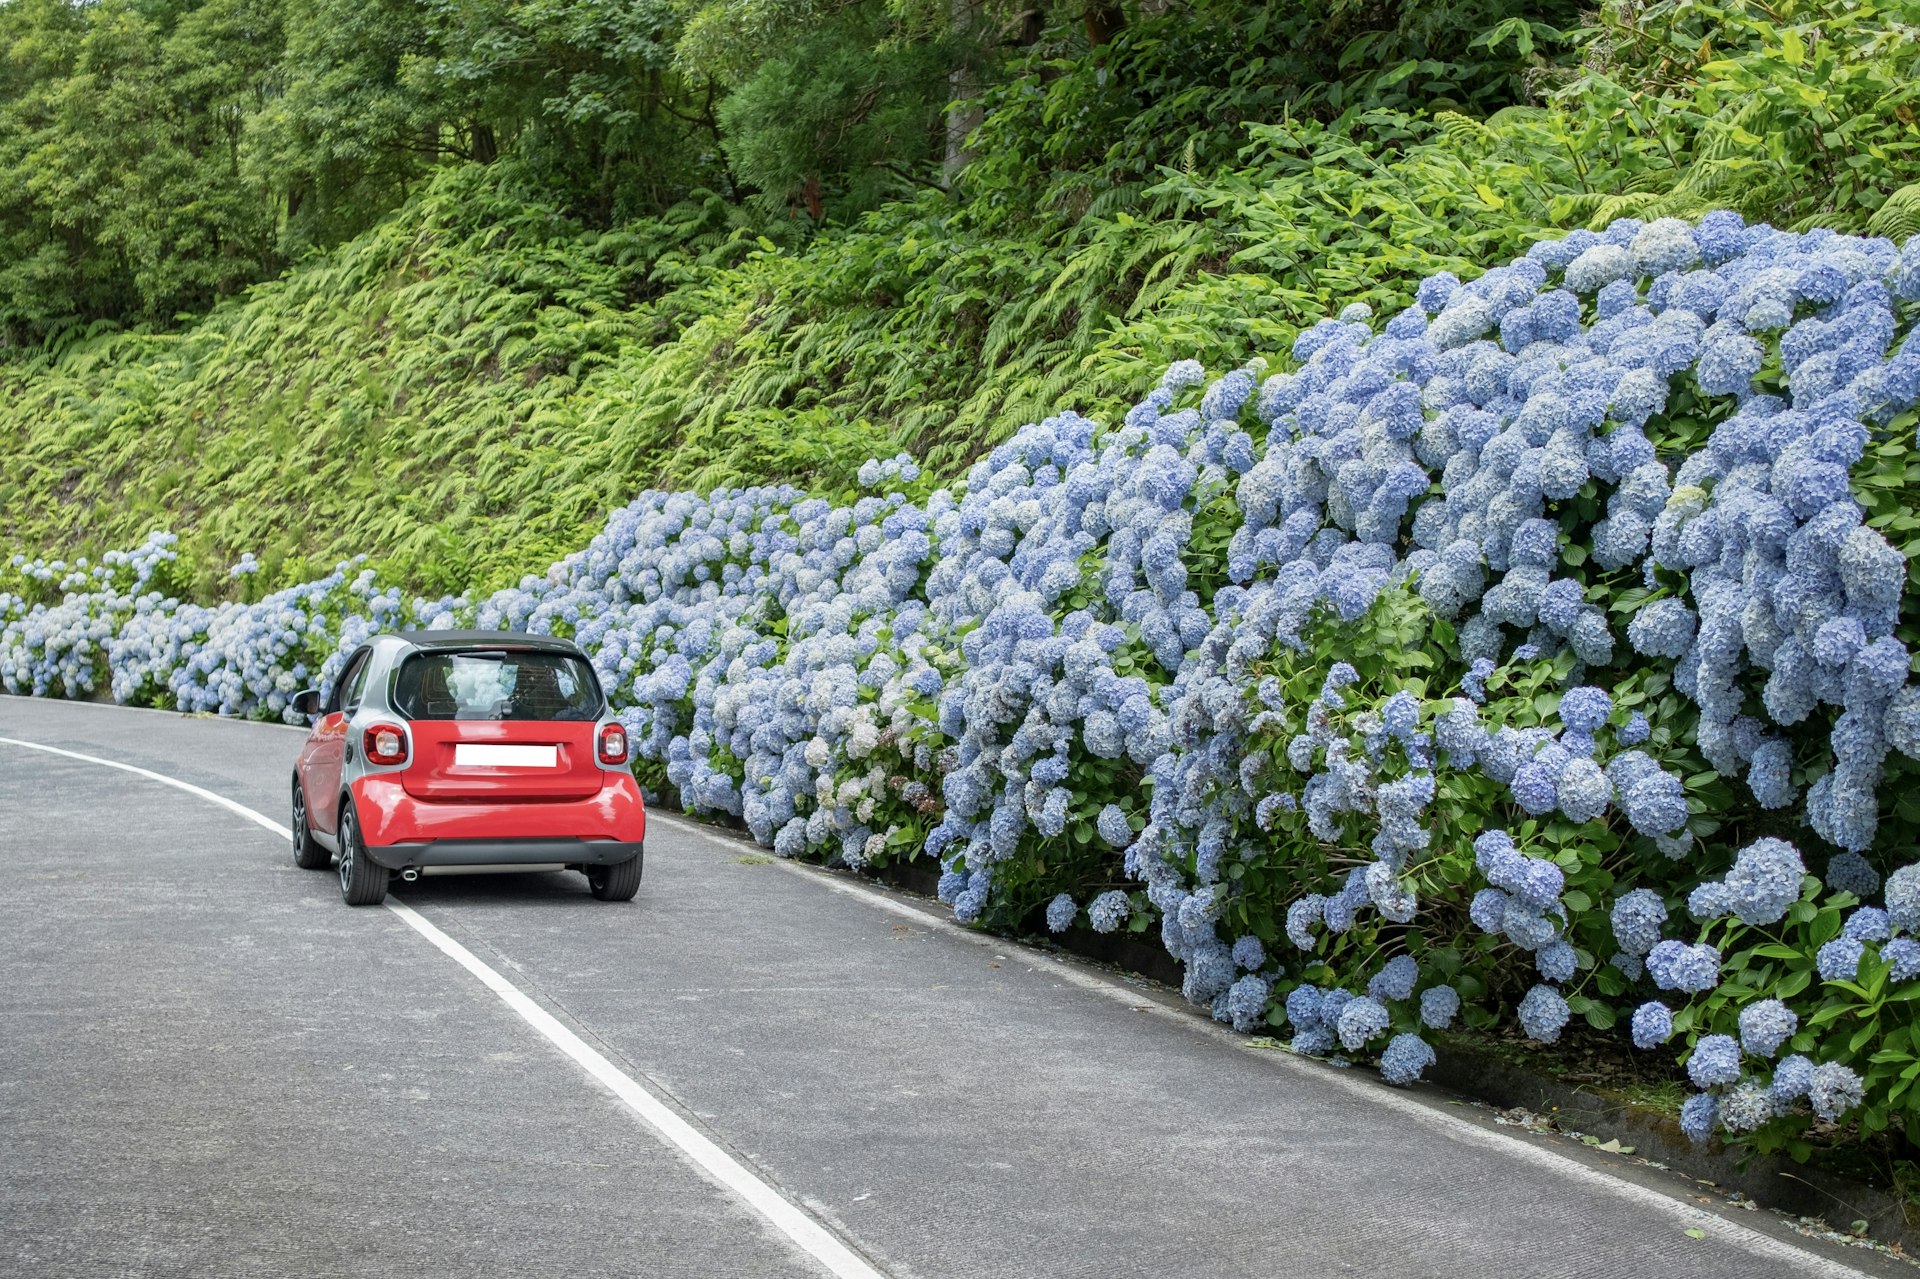 Red car on the road with blue hydrangea flowers. Sao Miguel island in the Azores;